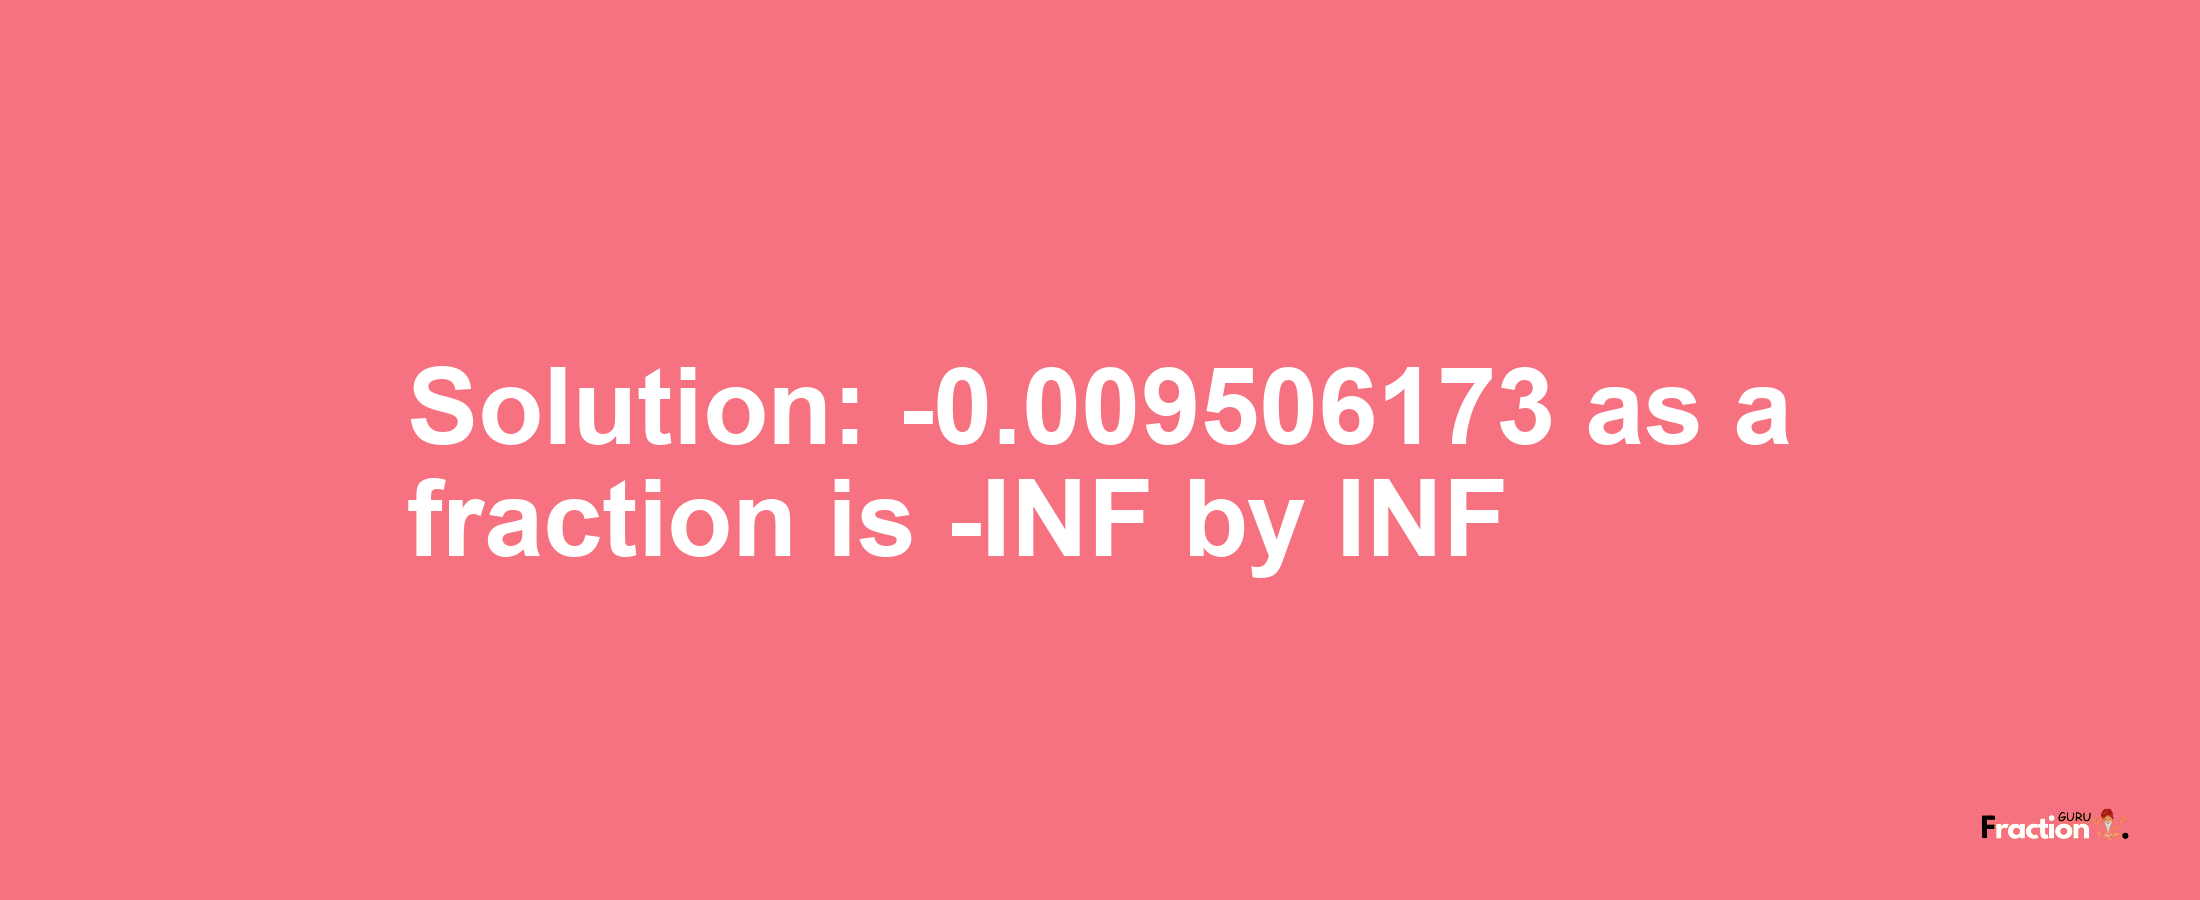 Solution:-0.009506173 as a fraction is -INF/INF